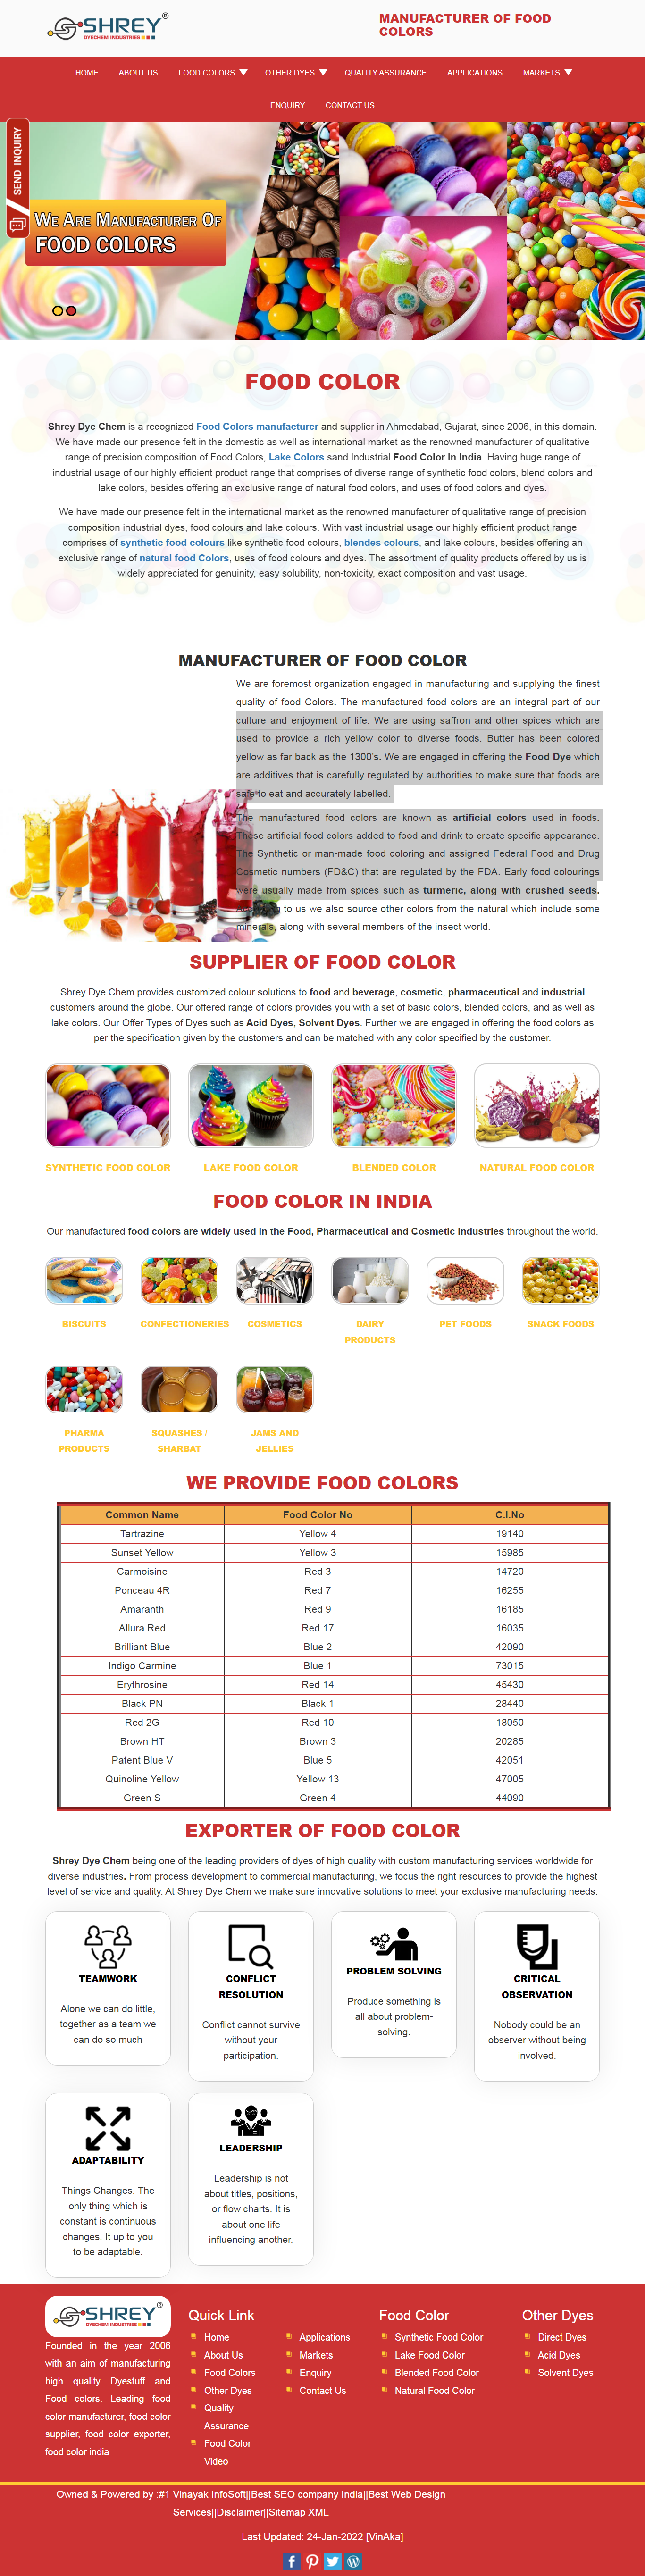 food color india